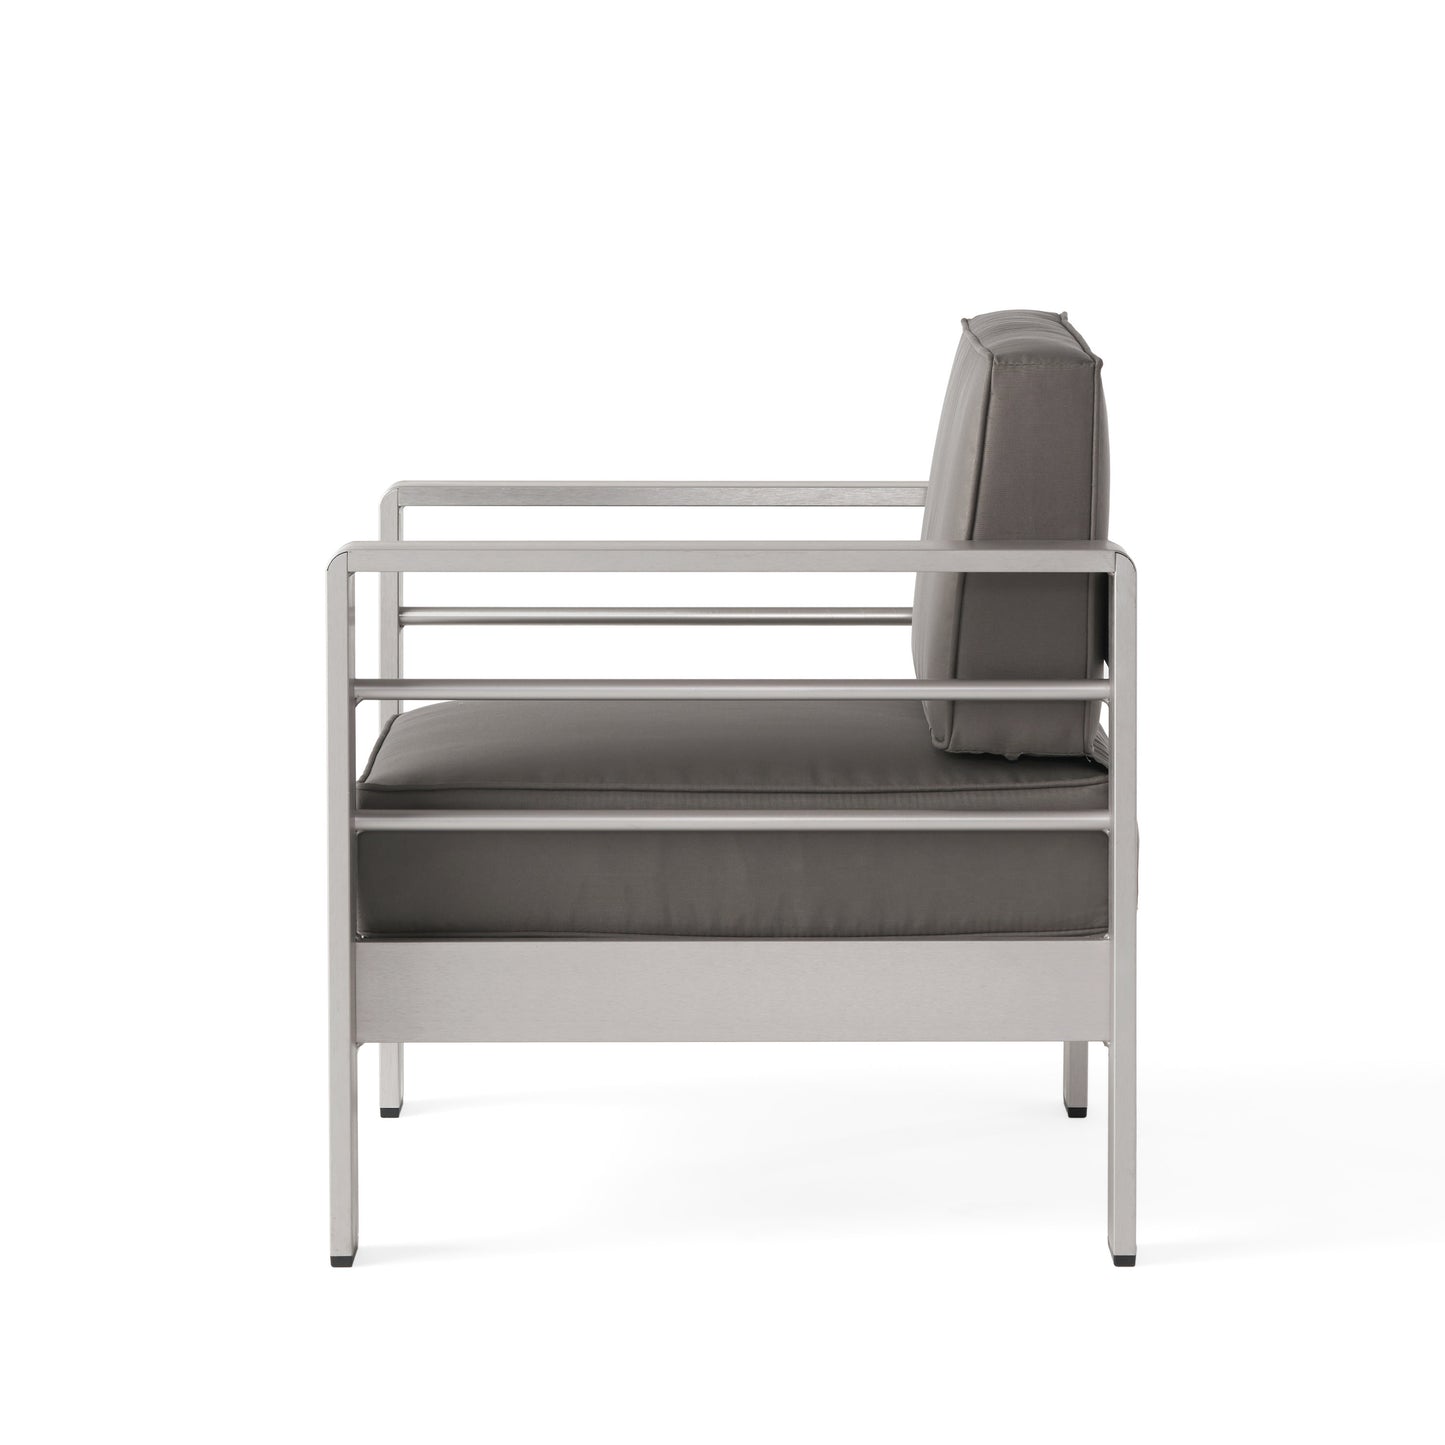 Emily Coral Outdoor Aluminum 2-Seater Club Chair Chat Set with Ottomans, Silver and Gray